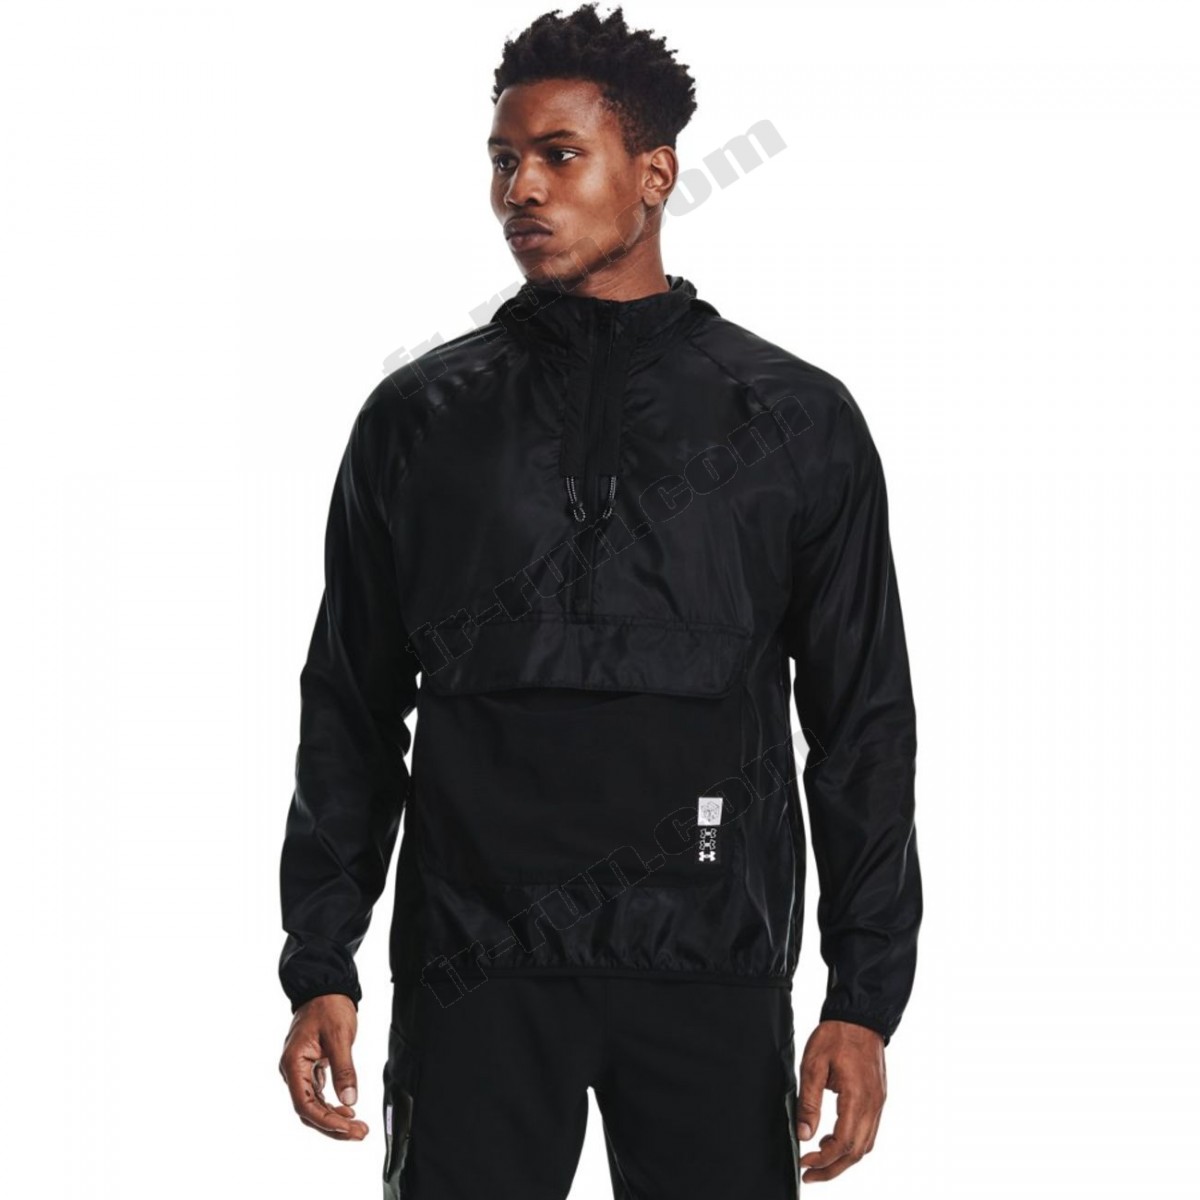 Under Armour/running homme UNDER ARMOUR Under Armour Run Anywhere Anorak √ Nouveau style √ Soldes - Under Armour/running homme UNDER ARMOUR Under Armour Run Anywhere Anorak √ Nouveau style √ Soldes